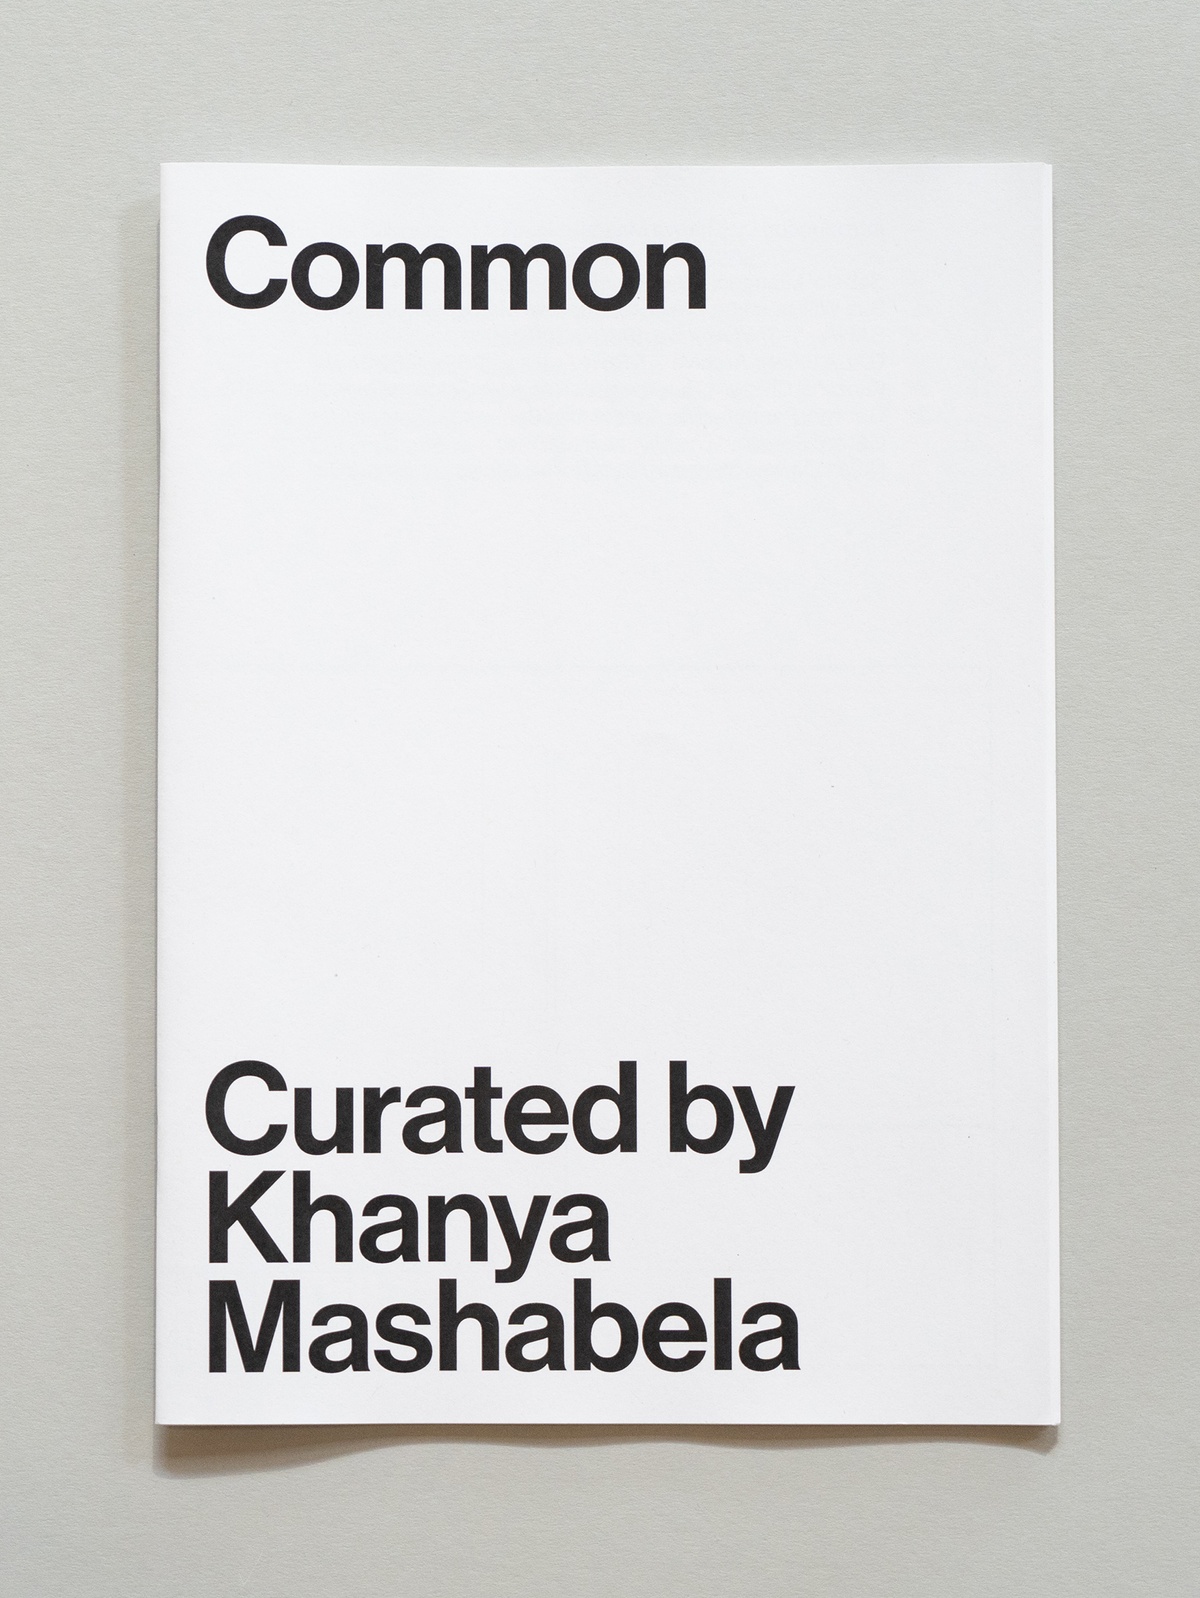 Photograph of the wayfinder publication for Common, curated by Khanya Mashabela in A4 Arts Foundation's Gallery.
